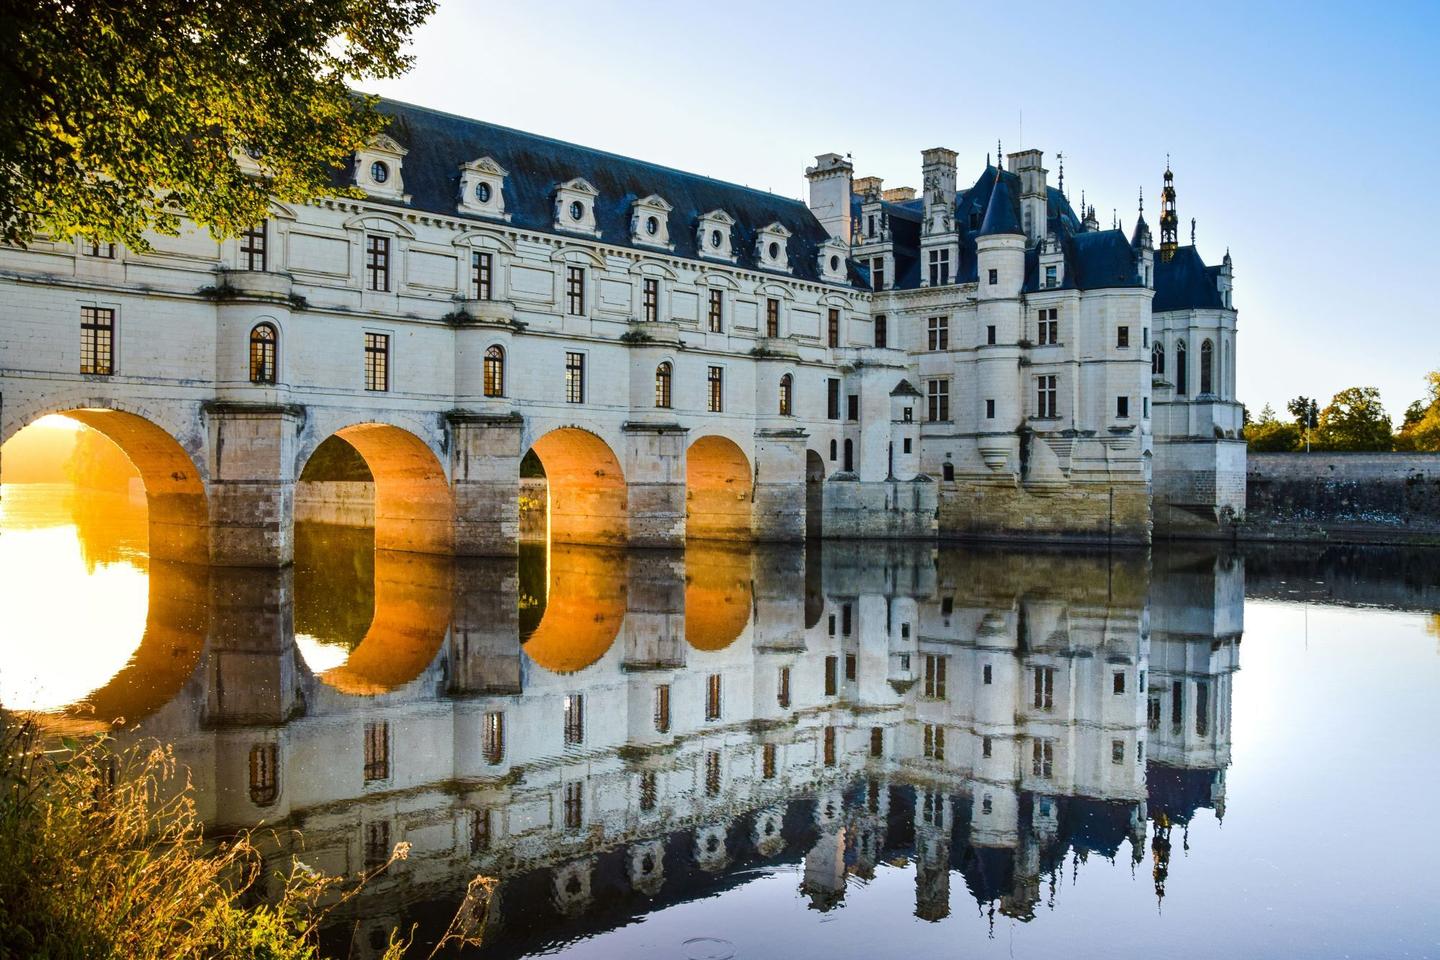 Majestic Château de Chenonceau spanning river, sunset reflections, iconic French castle and heritage site.